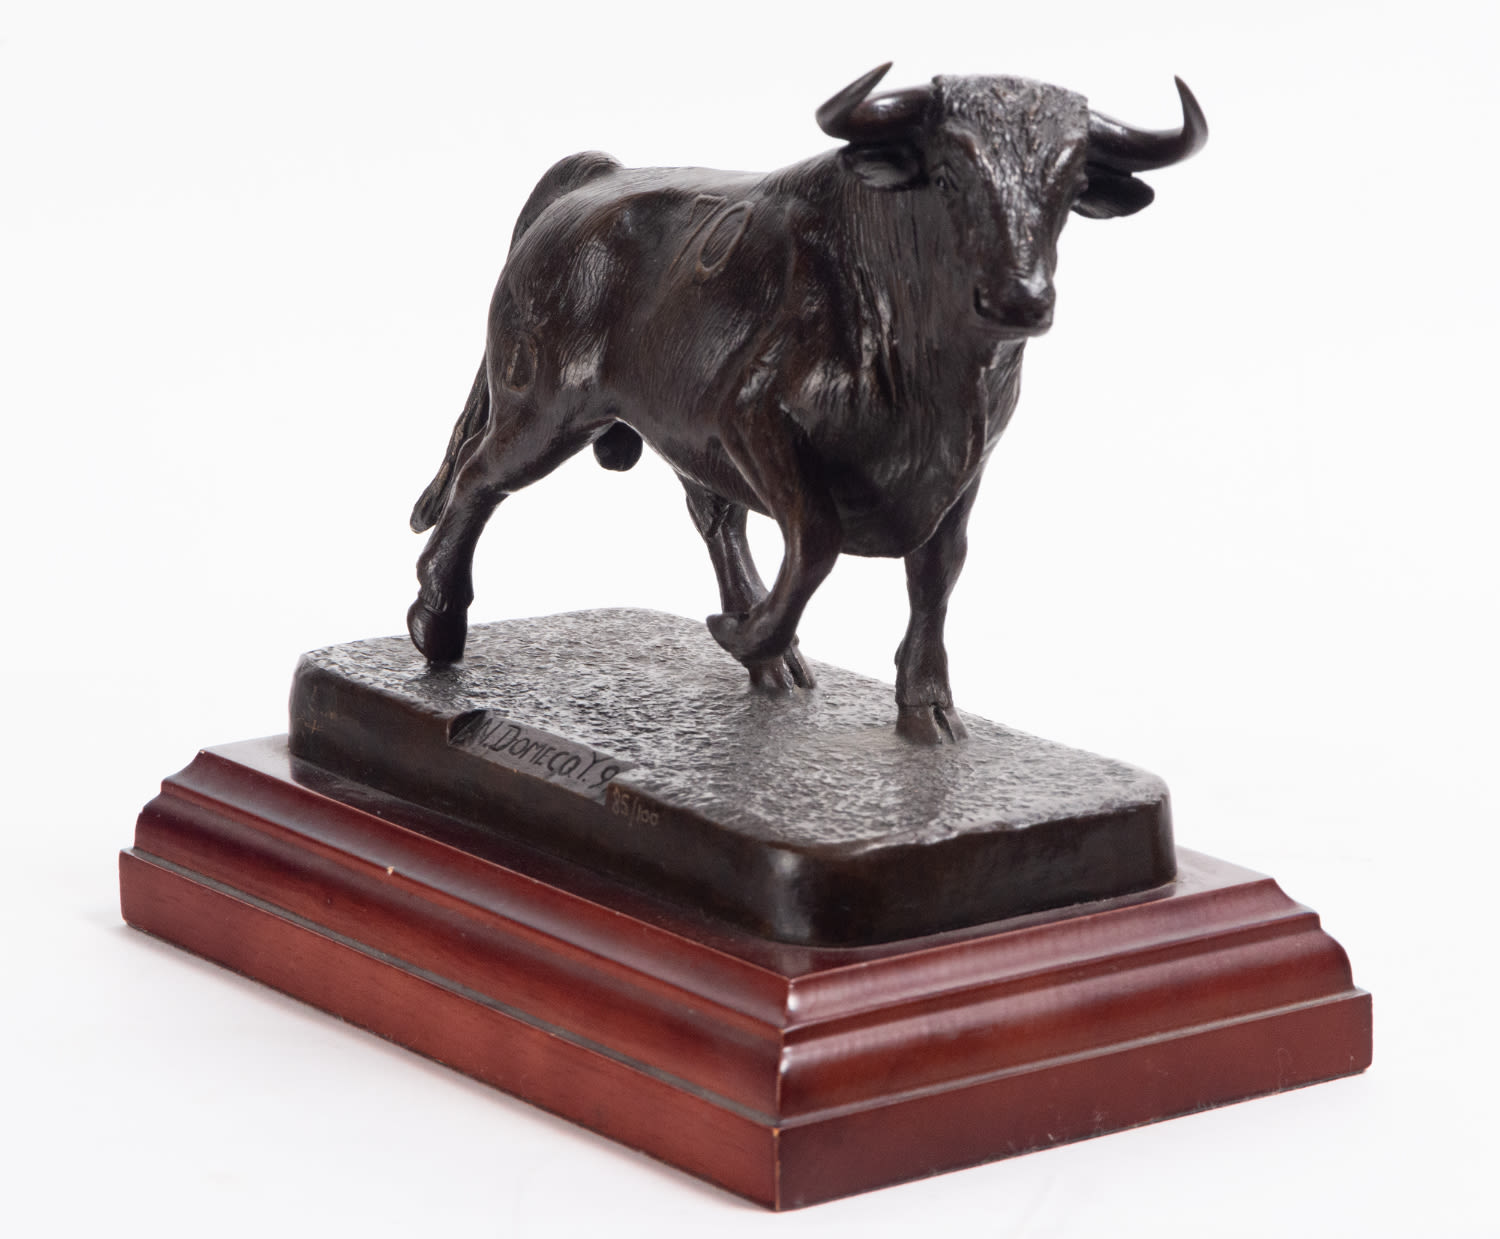 Domecq fighting bull in patinated bronze, 20th century - Image 3 of 5